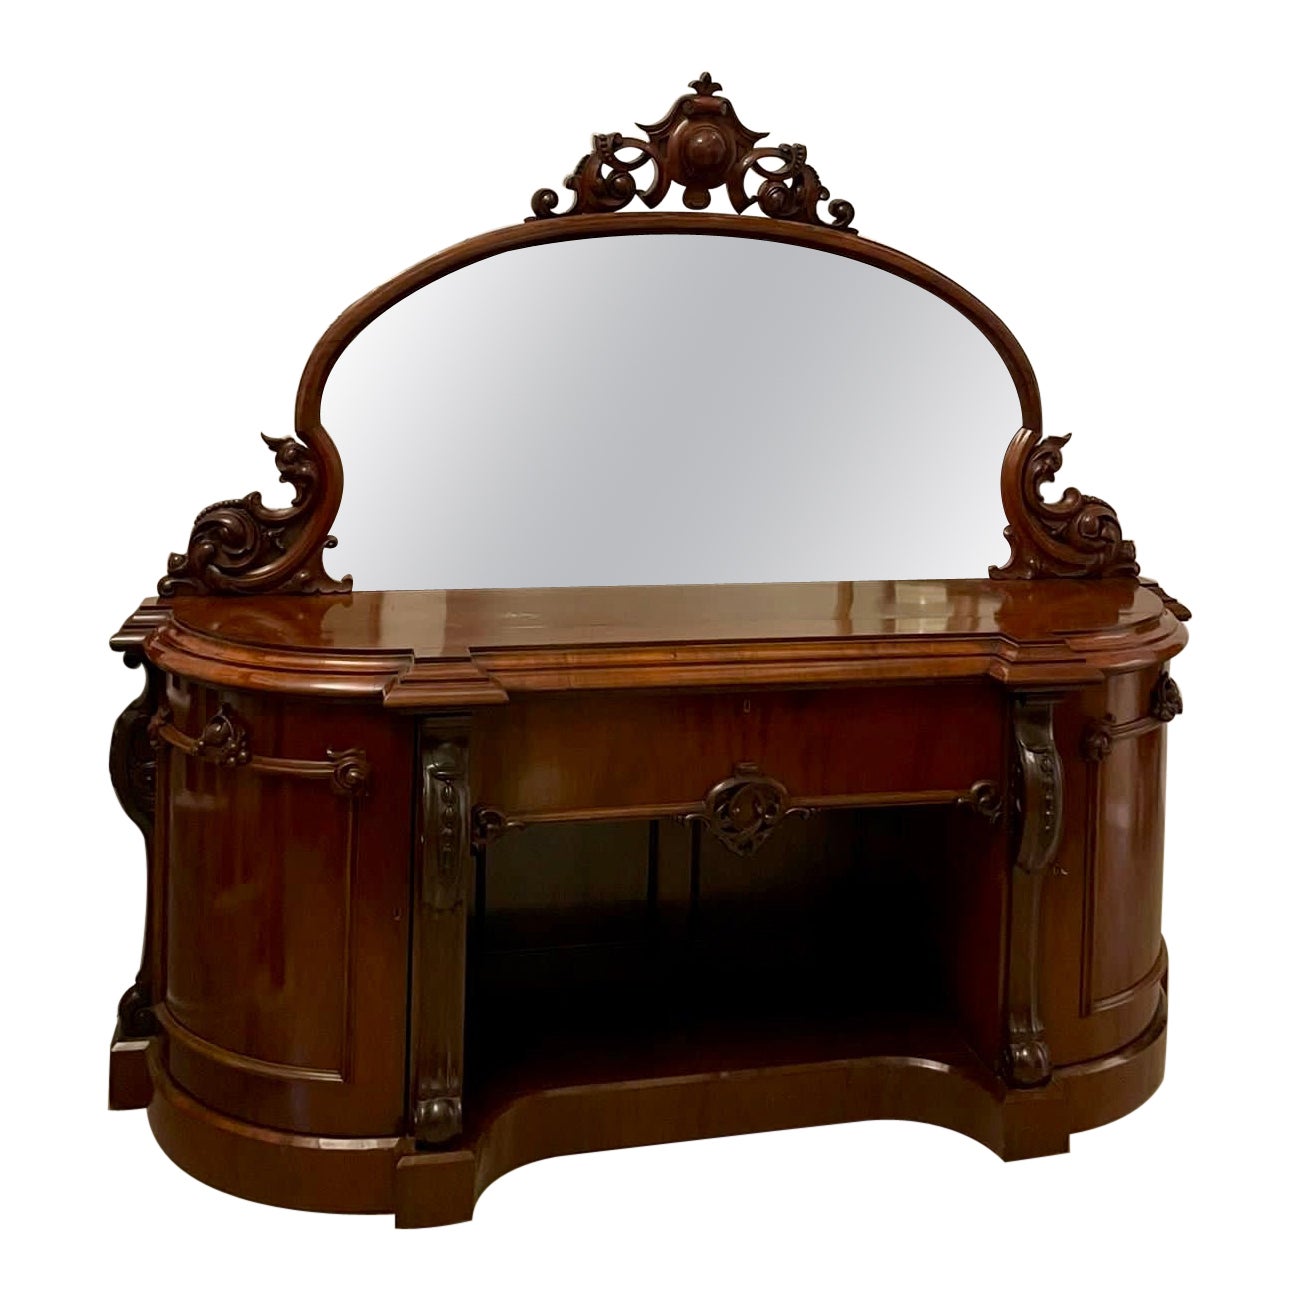 Outstanding Quality Antique Victorian Carved Mahogany Mirror Back Sideboard  For Sale